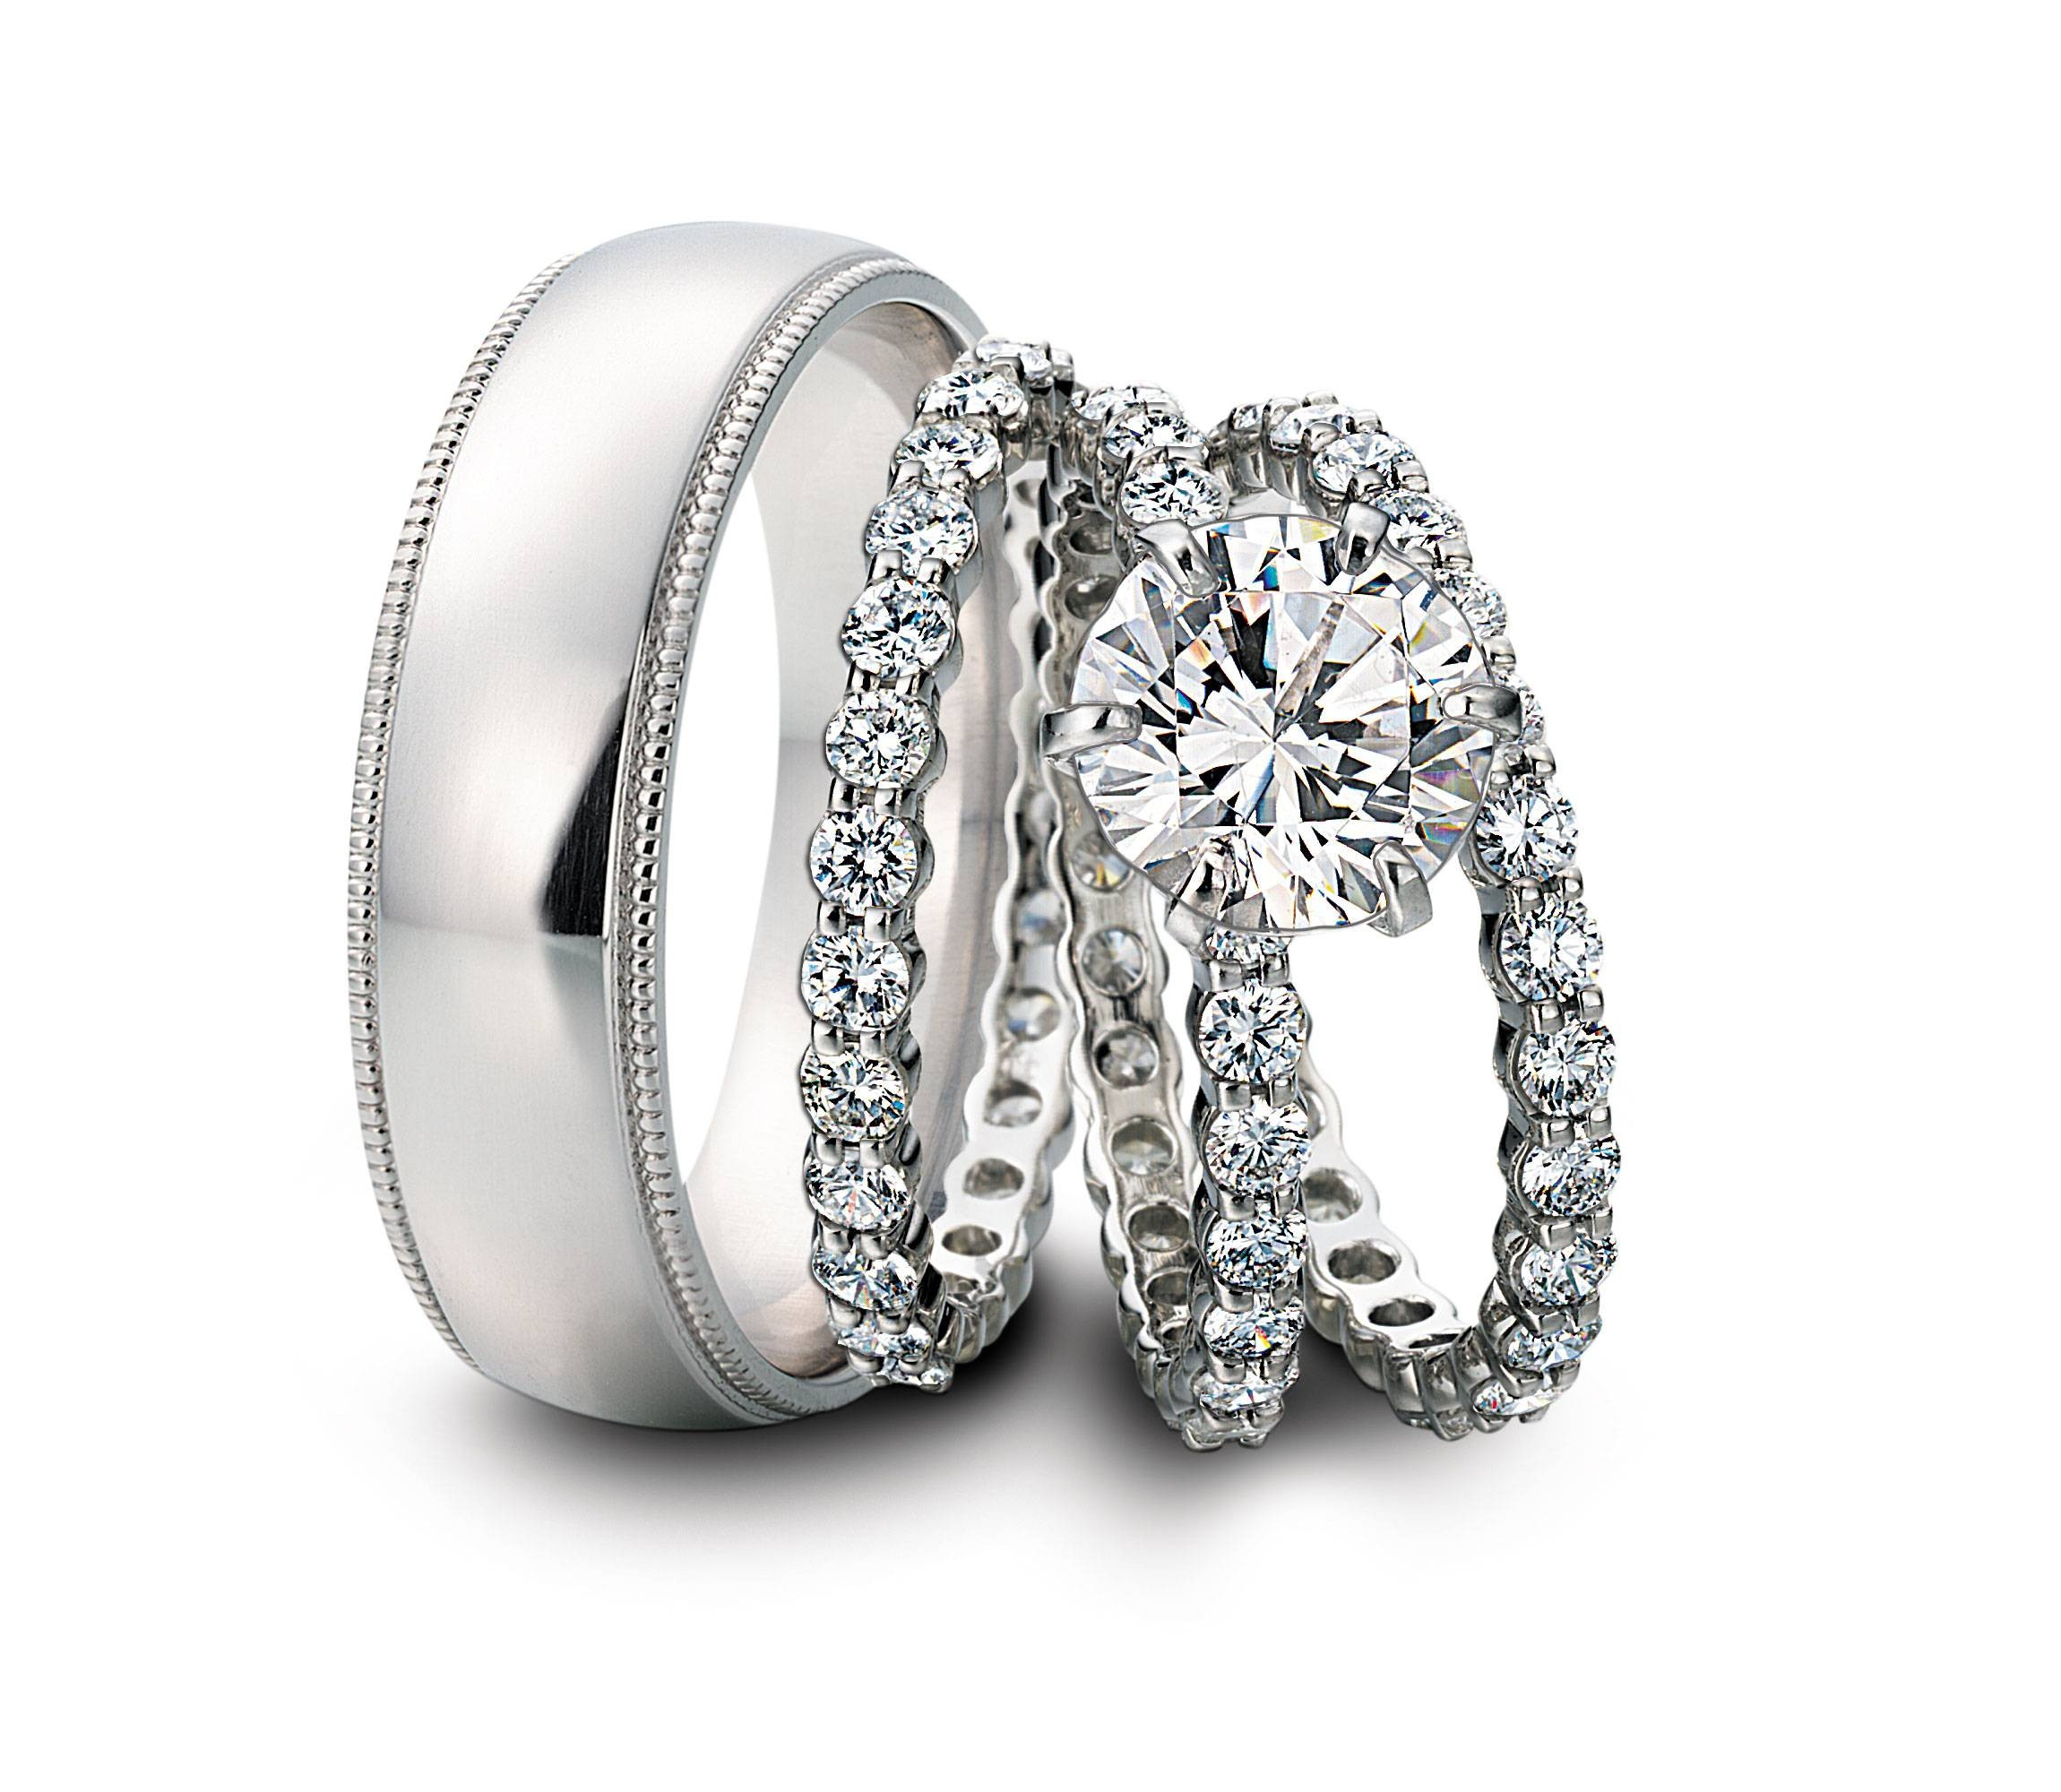 Cheap Wedding Rings For Her And Him
 15 Inspirations of Cheap Wedding Bands Sets His And Hers